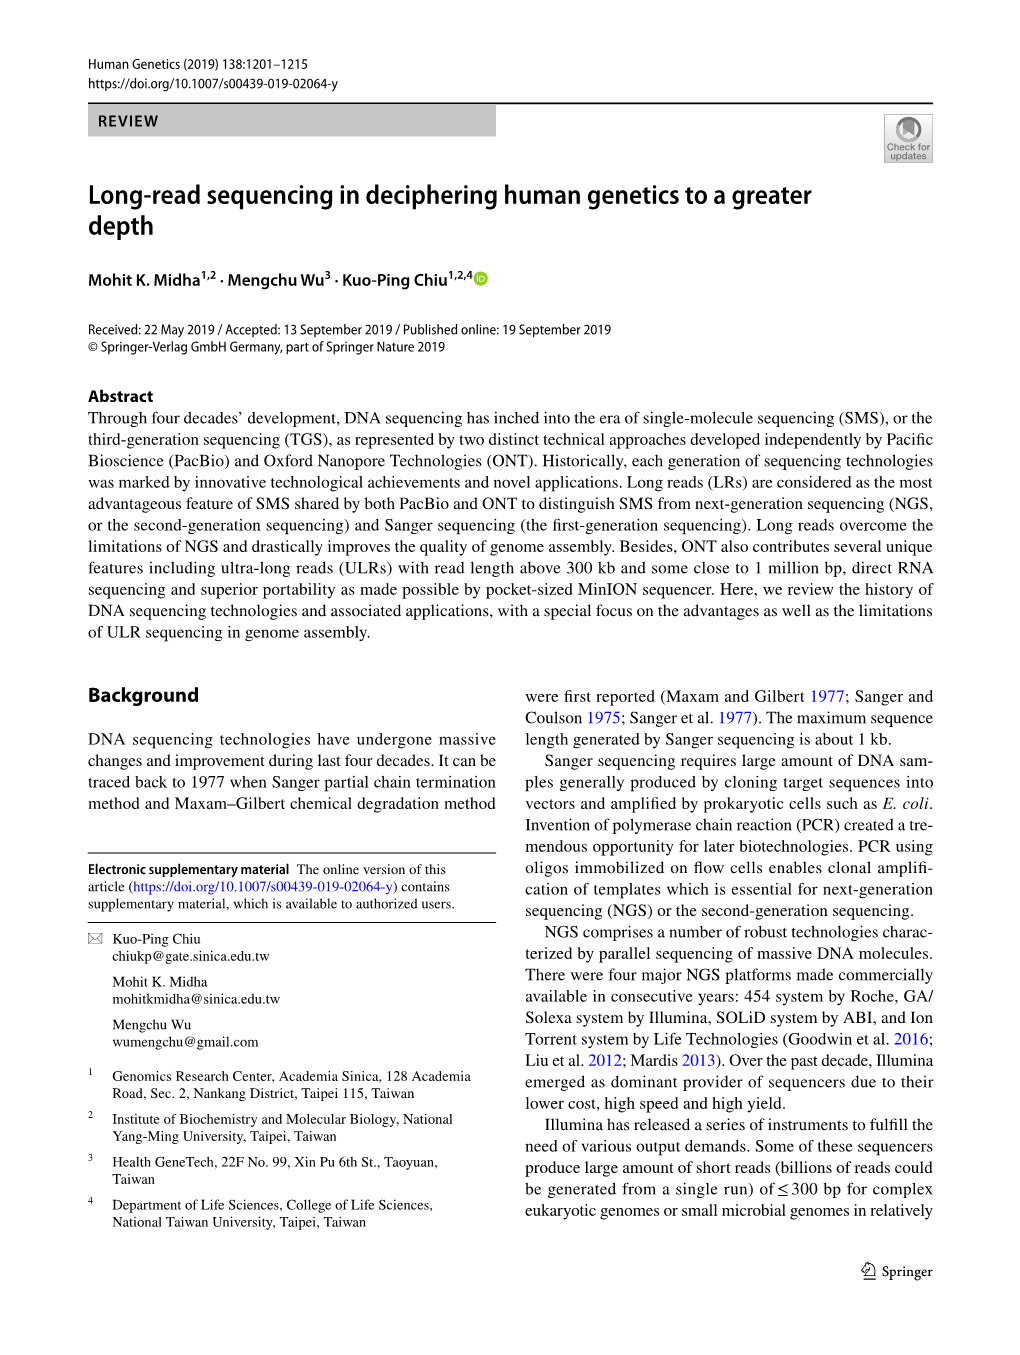 Long-Read Sequencing in Deciphering Human Genetics to a Greater Depth